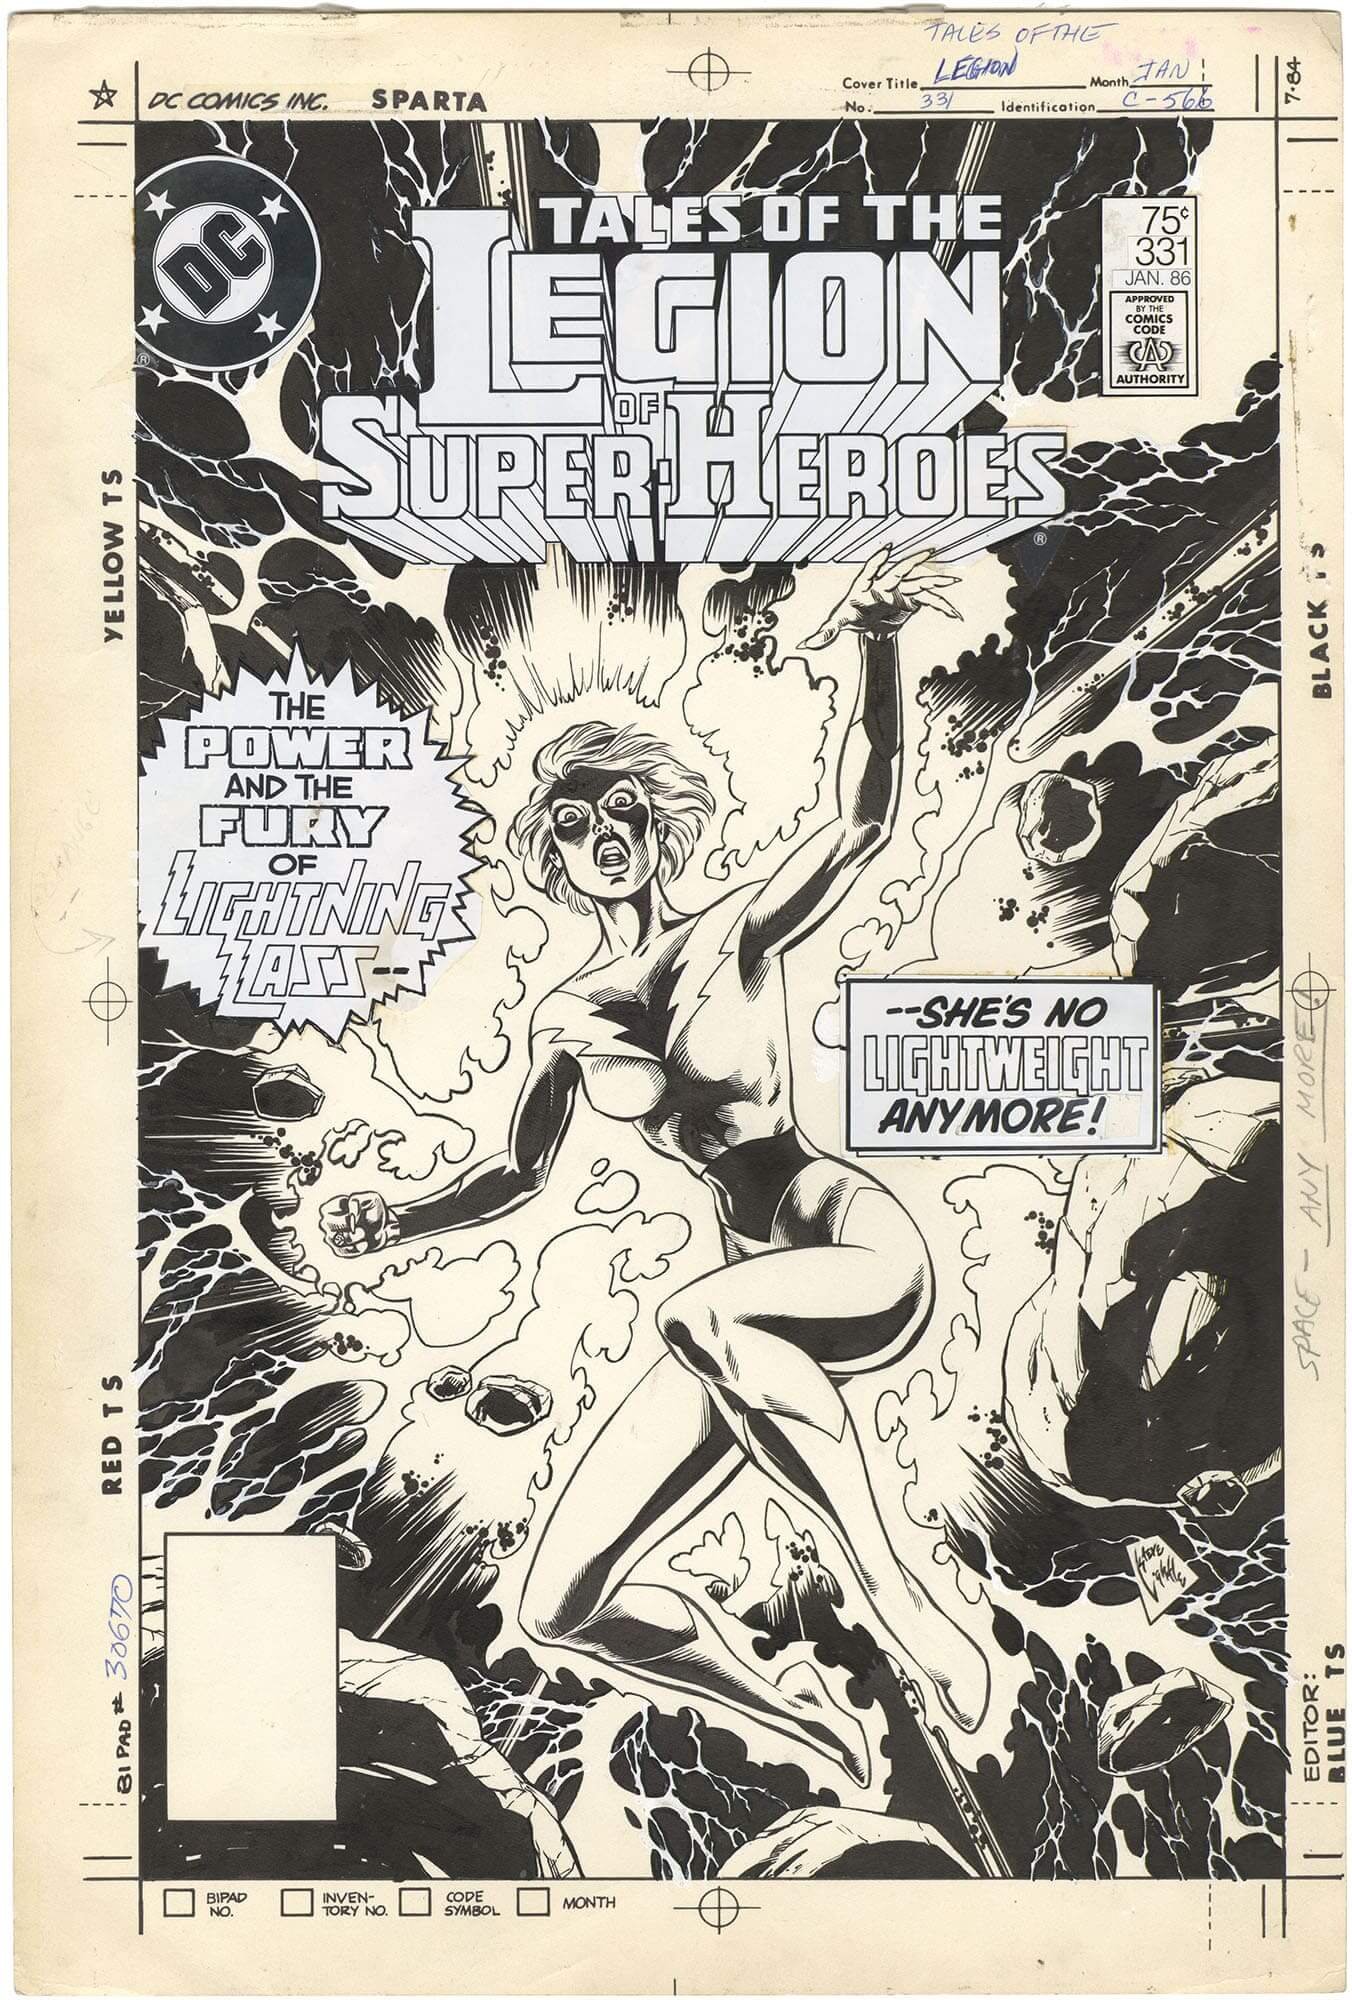 Tales of the Legion of Super-Heroes #331 Cover